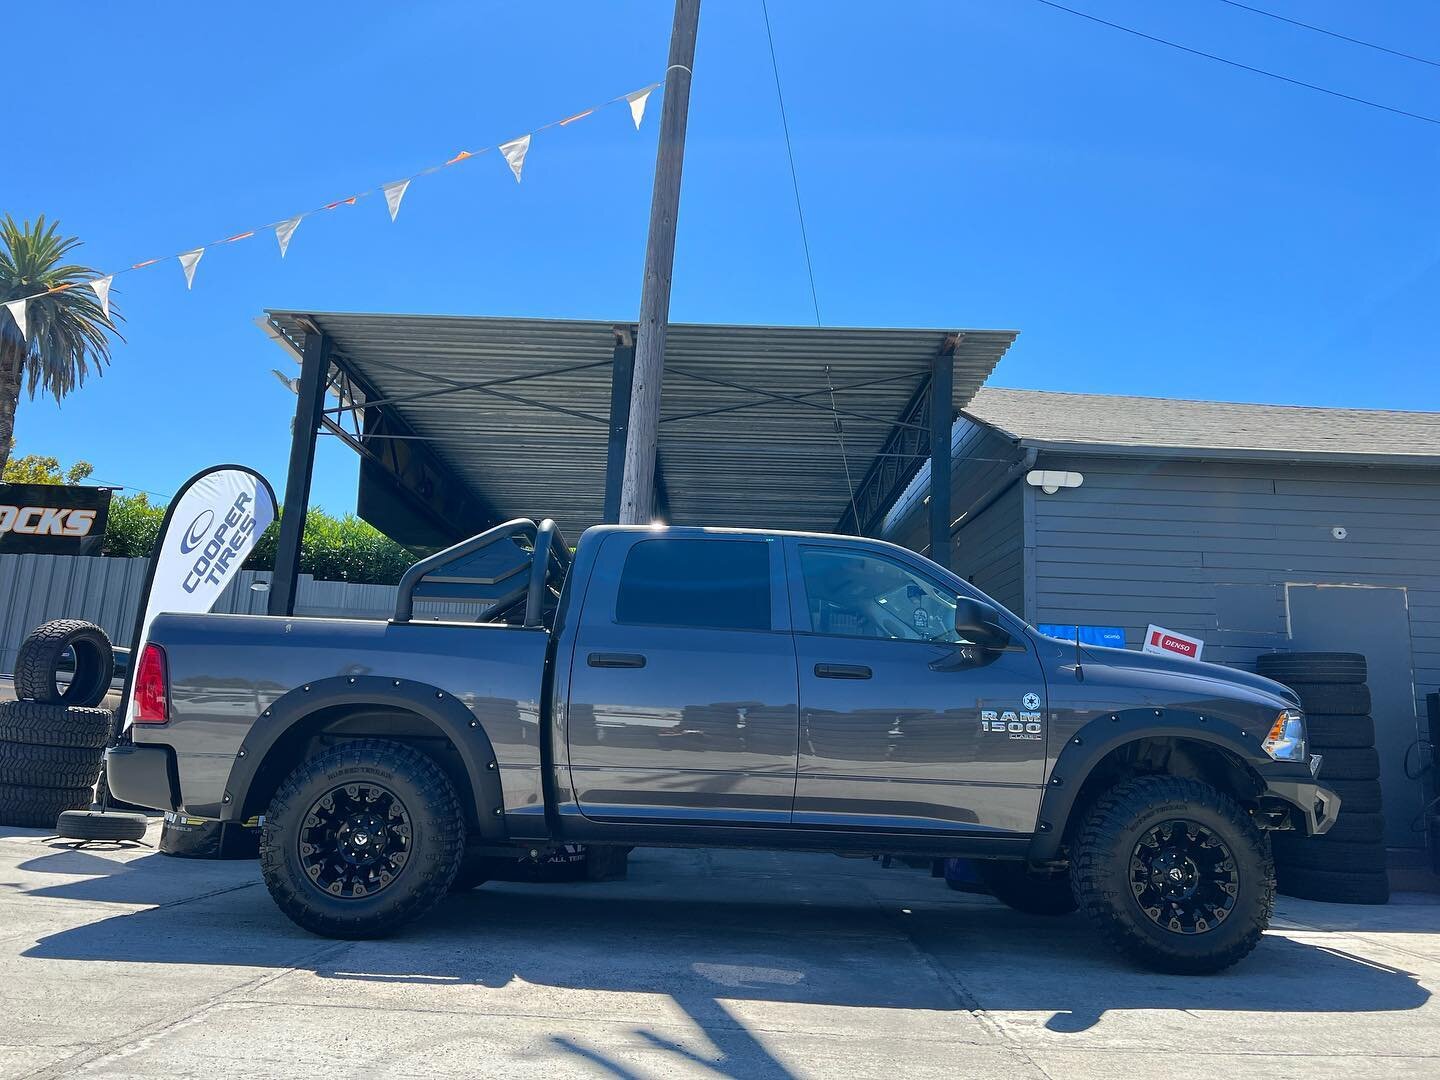 Ram 1500 running a Rough country leveling kit and rocking 17&rsquo; Fuel Offroad Wheeels on Patriot RT tires 
#dodgefam #ram #ram1500 #offroad #offroading #offroad4x4 #fueloffroad #fuelwheels #patriottires #roughcountry #roughcountrylift #roughcountr